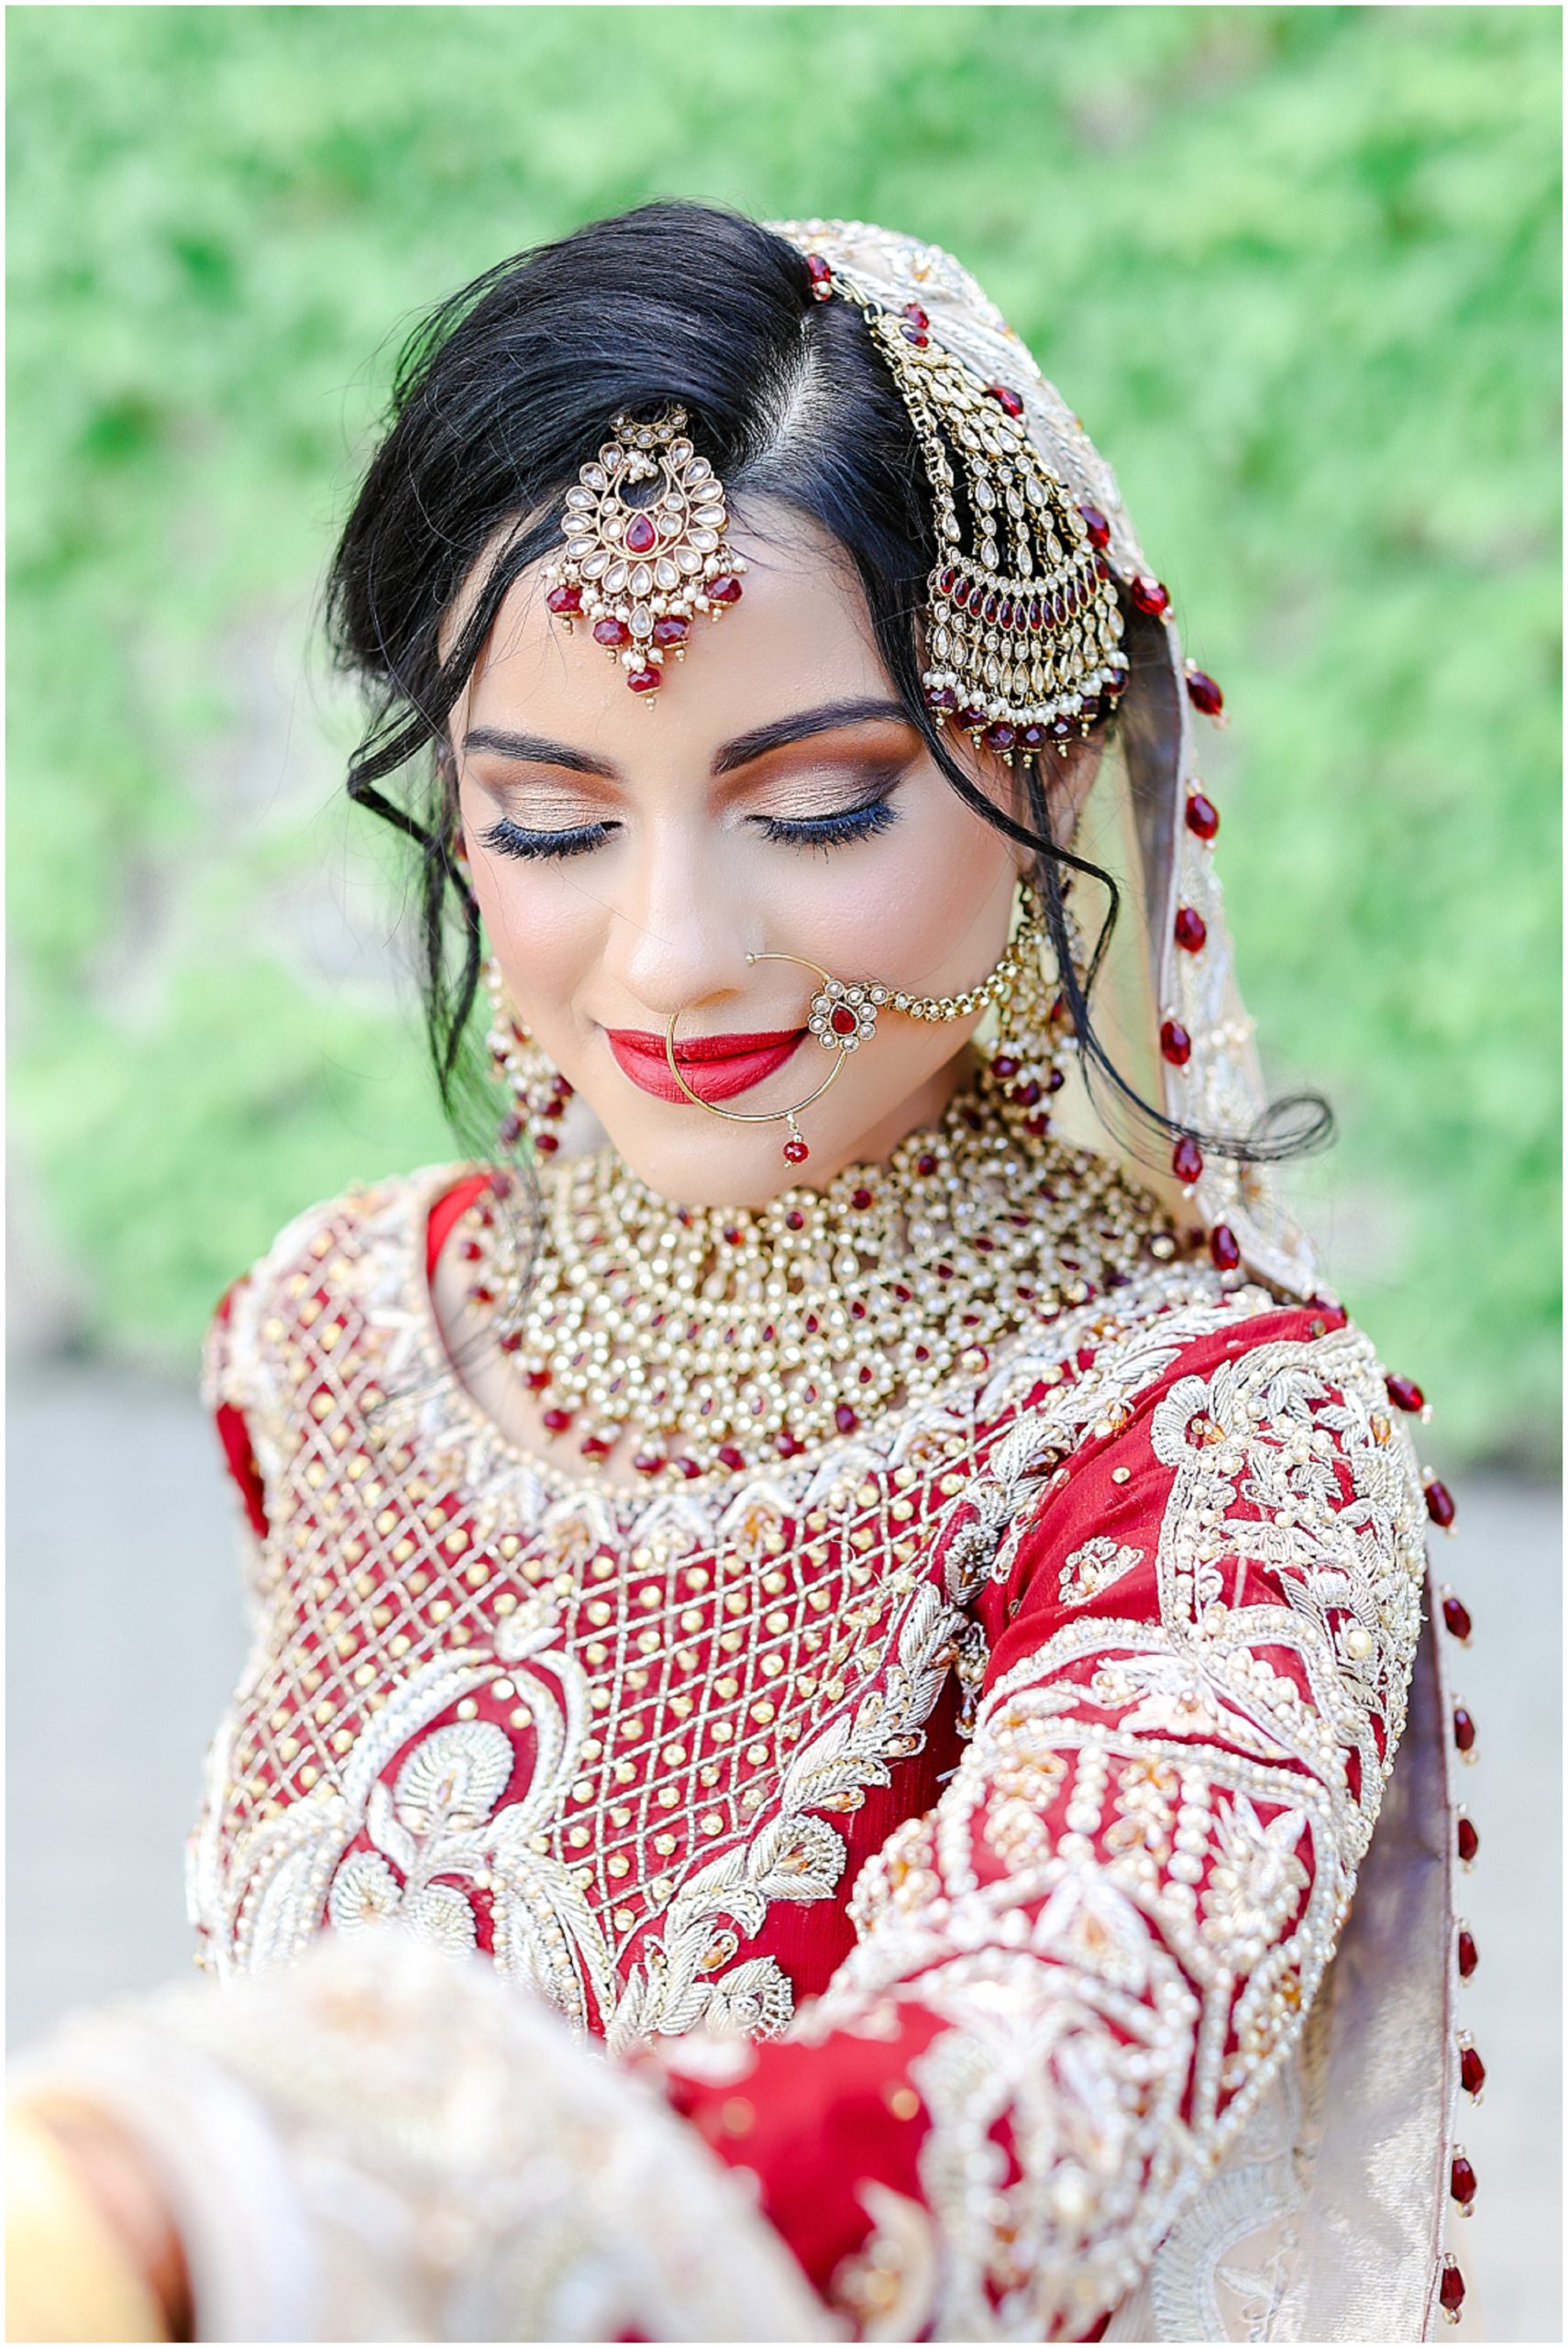 bridal makeup by ayesha baig and hair by amandeep in kansas  A Pakistani Indian Wedding in Kansas City by the best wedding photographer - Mariam Saifan Photography - Wedding Ideas - Muslim Wedding - Kauffman Center of Performing Arts - Pakistani Wedding Outfit - Wedding Makeup - Stl Wedding Photographer - Florida Indian Wedding Photography - Beautiful Bridal Makeup - Loews Kansas City Wedding Photography